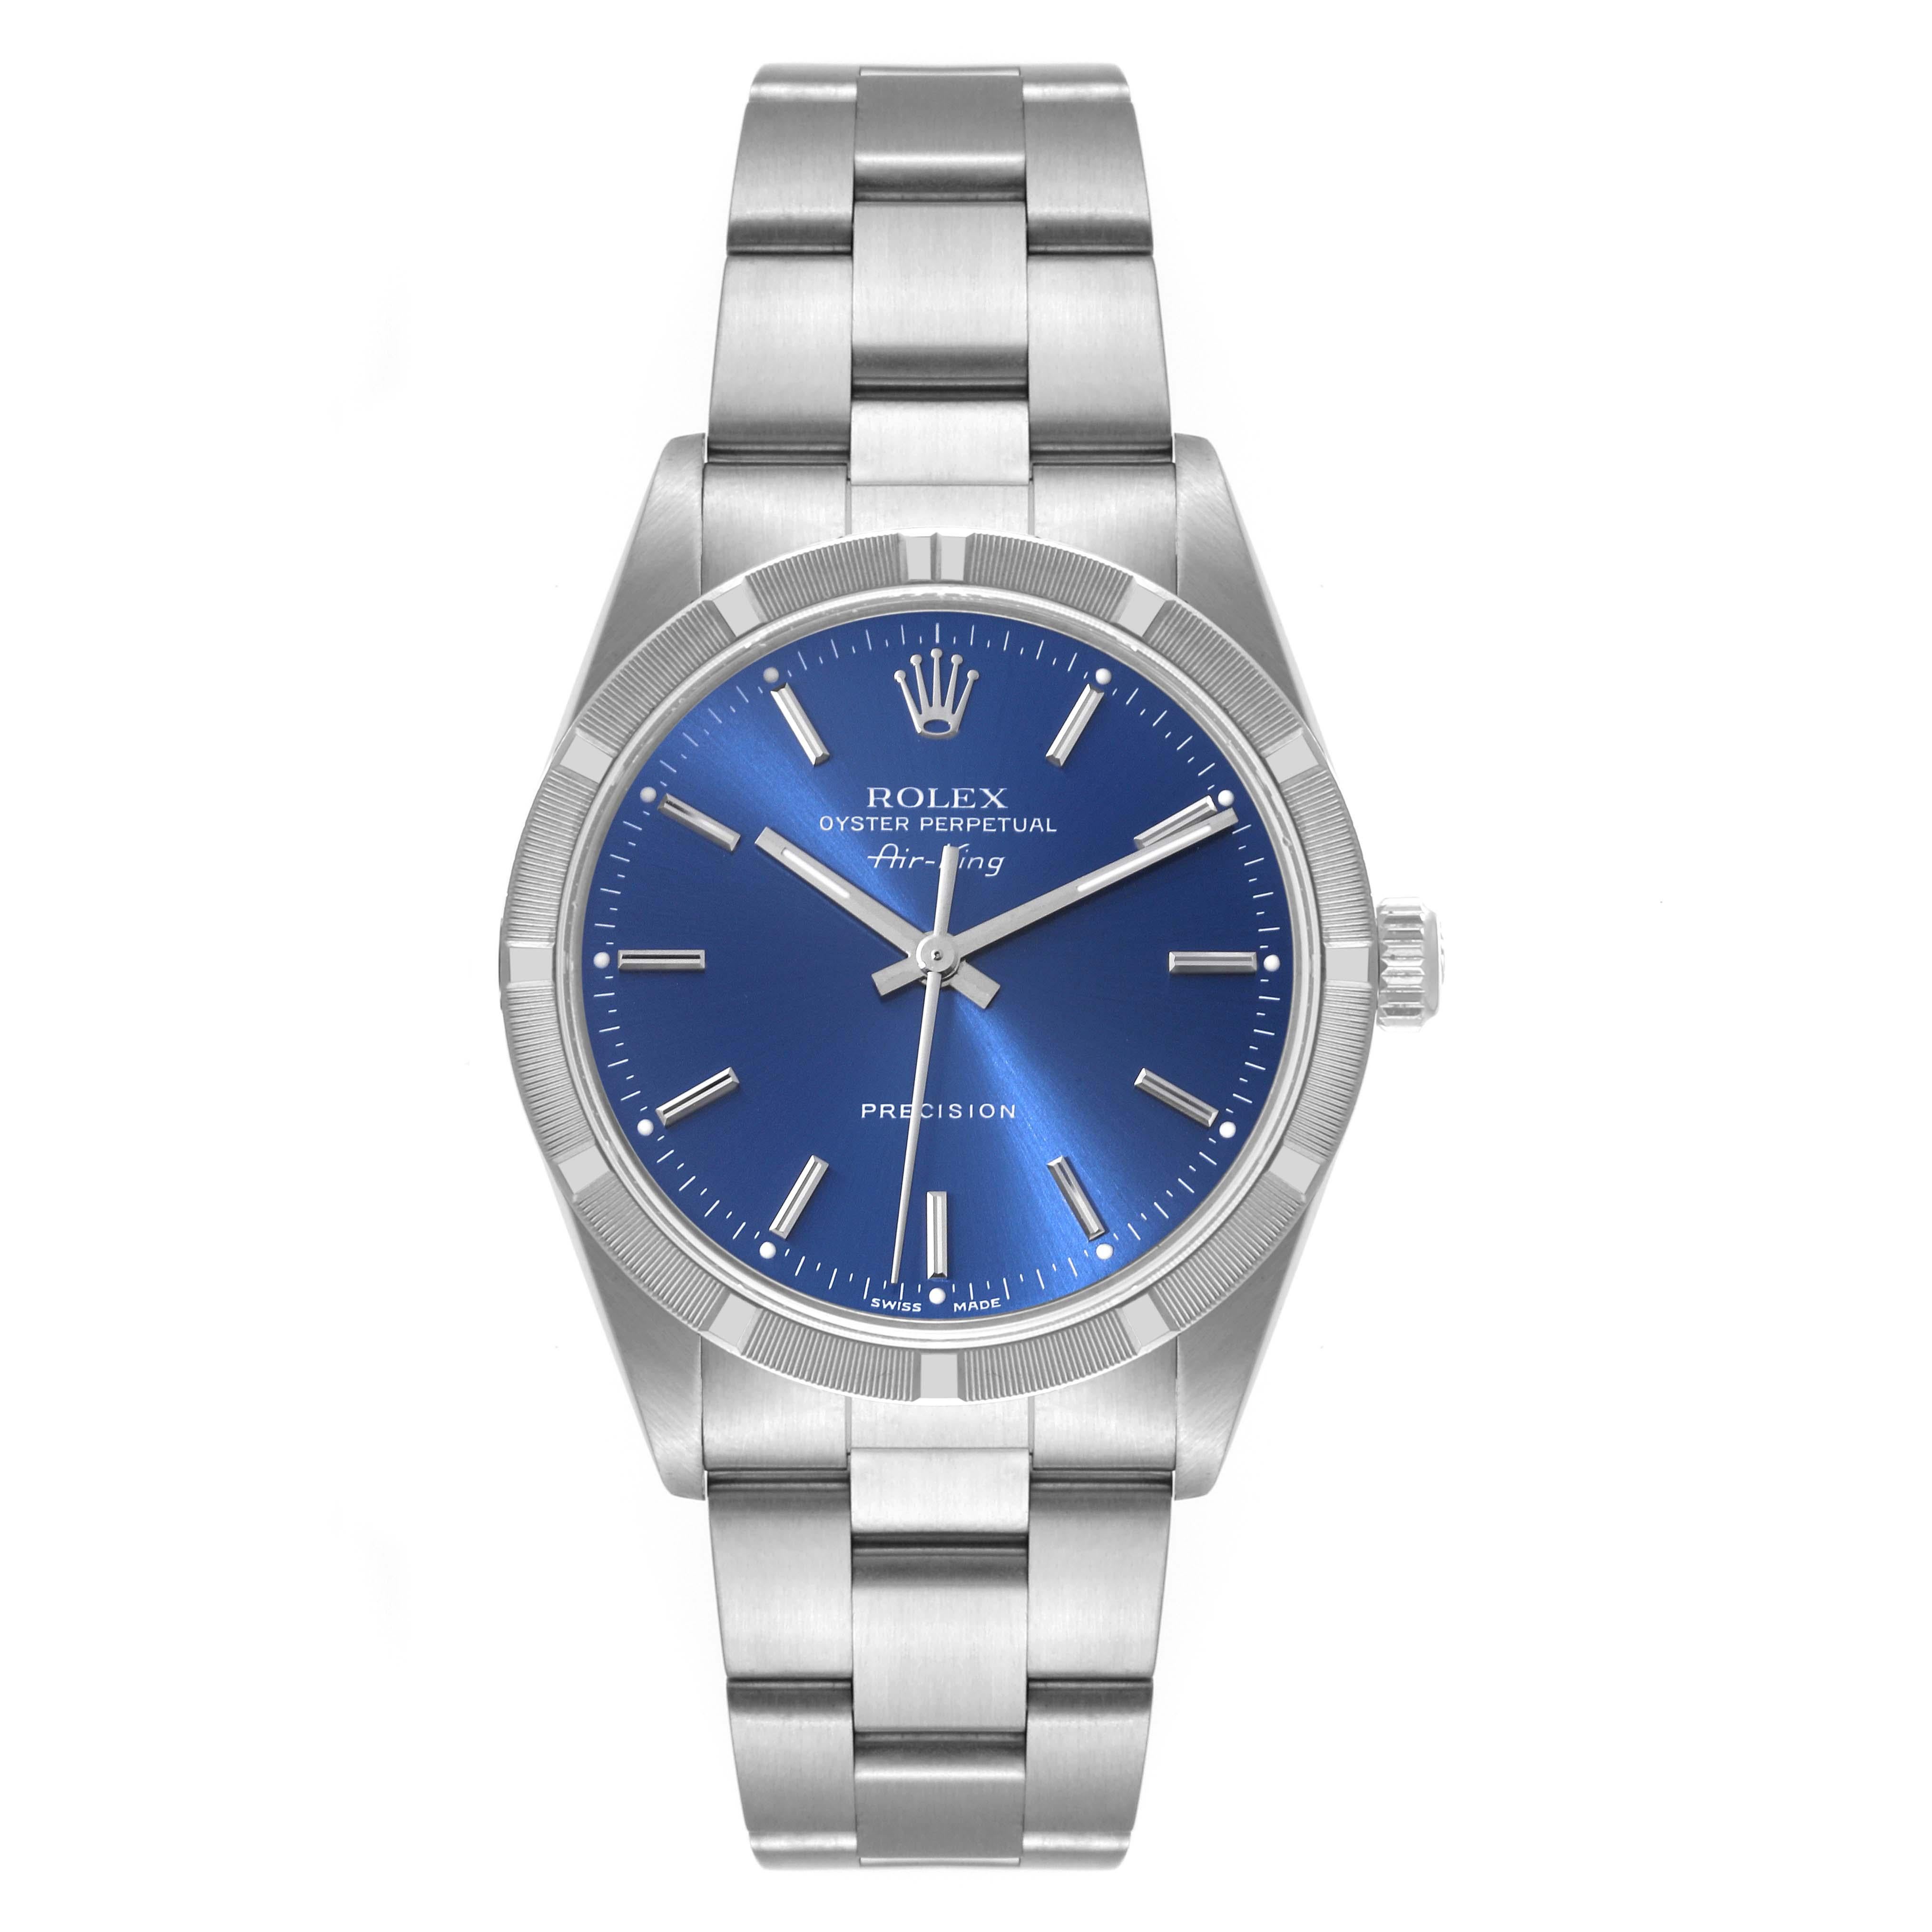 Rolex Air King Engine Turned Bezel Blue Dial Steel Mens Watch 14010. Automatic self-winding movement. Stainless steel case 34.0 mm in diameter. Rolex logo on the crown. Stainless steel engine turned bezel. Scratch resistant sapphire crystal. Blue